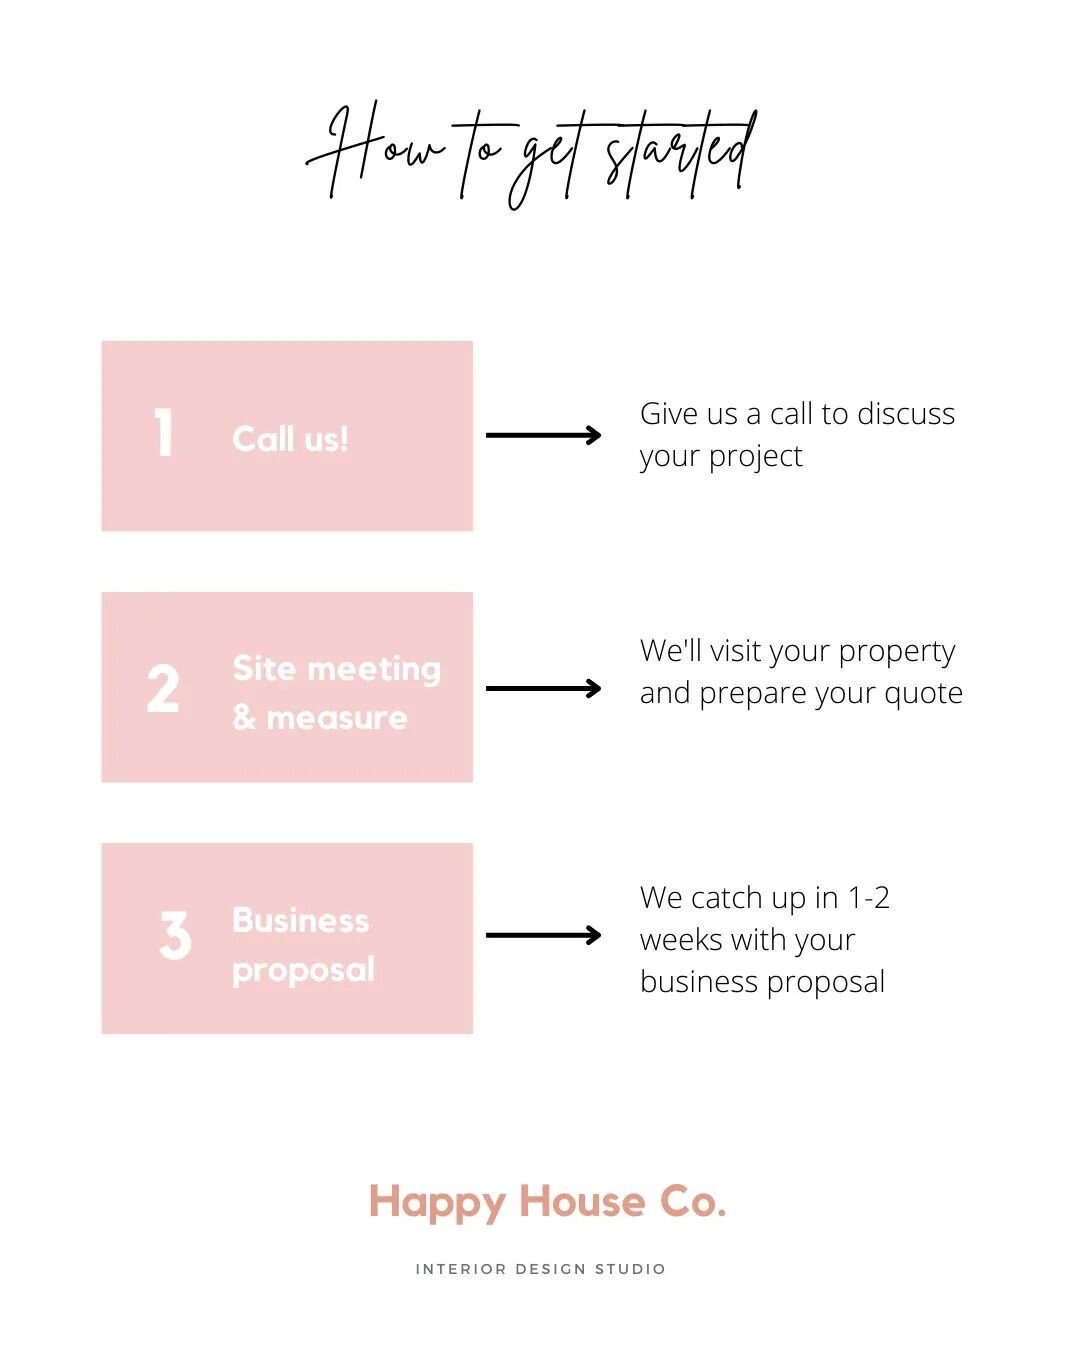 It's as simple as 1, 2, 3 😁 

Are you looking to renovate or build a new home, but don't know how to get started? Give us a call to discover how we can help! From design work to choosing colours and materials, or renovations to project management, w